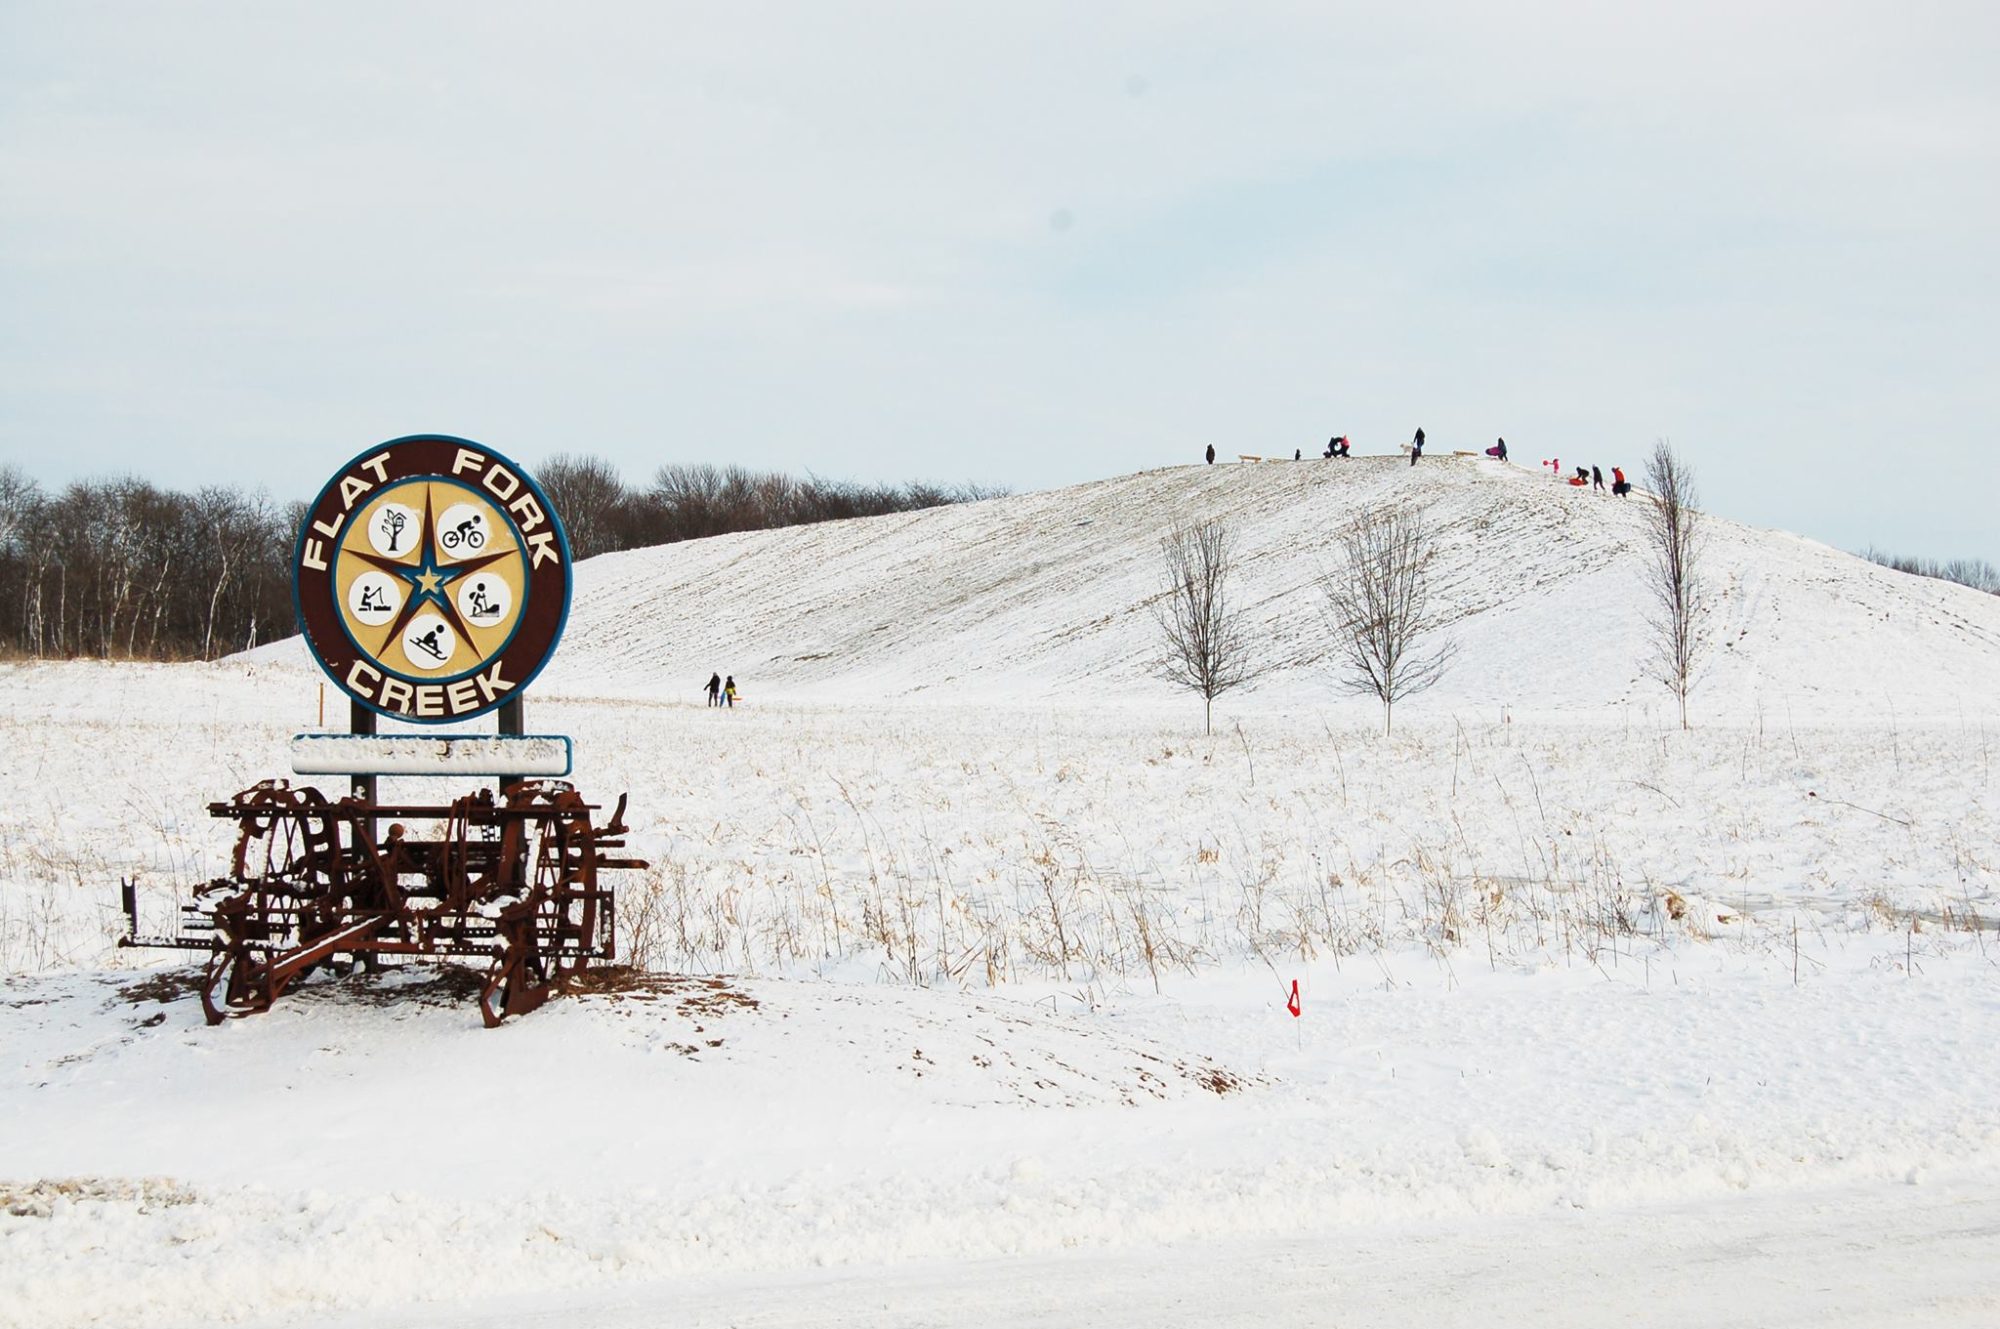 Sledding Hill Flat Fork Creek; Places to go sledding in Indianapolis